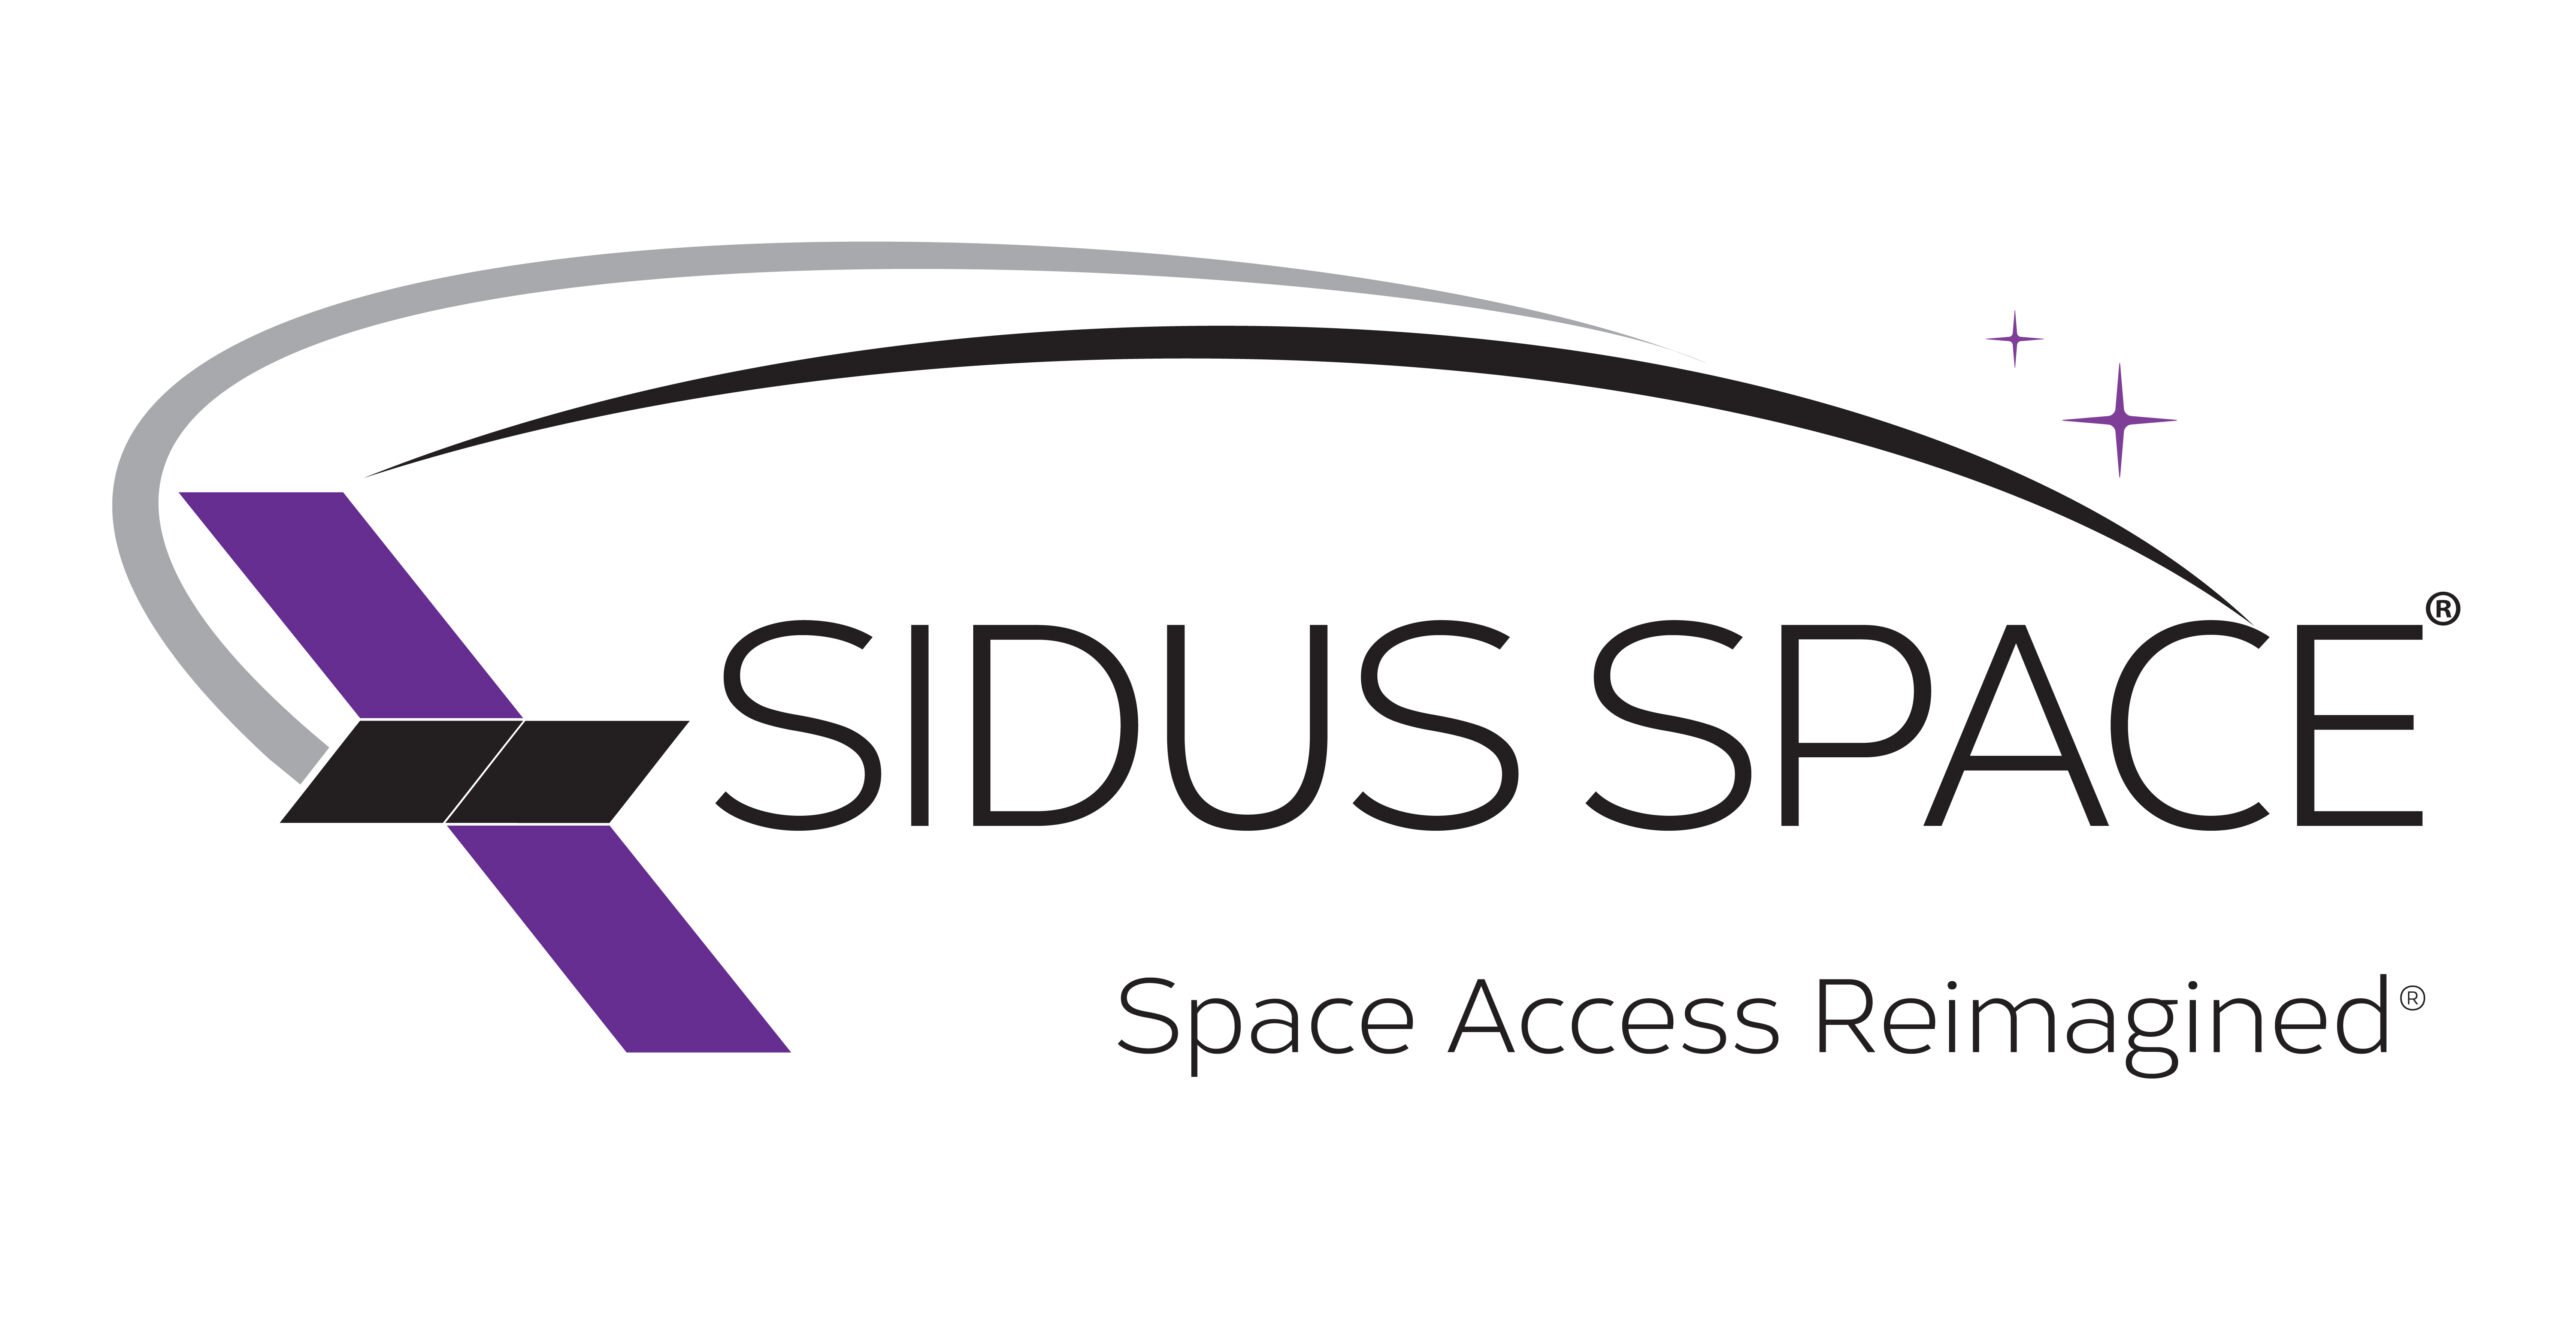 Sidus Space And L3harris Team For The Department Of Defense Mentor Protégé Program Spacequip 0035